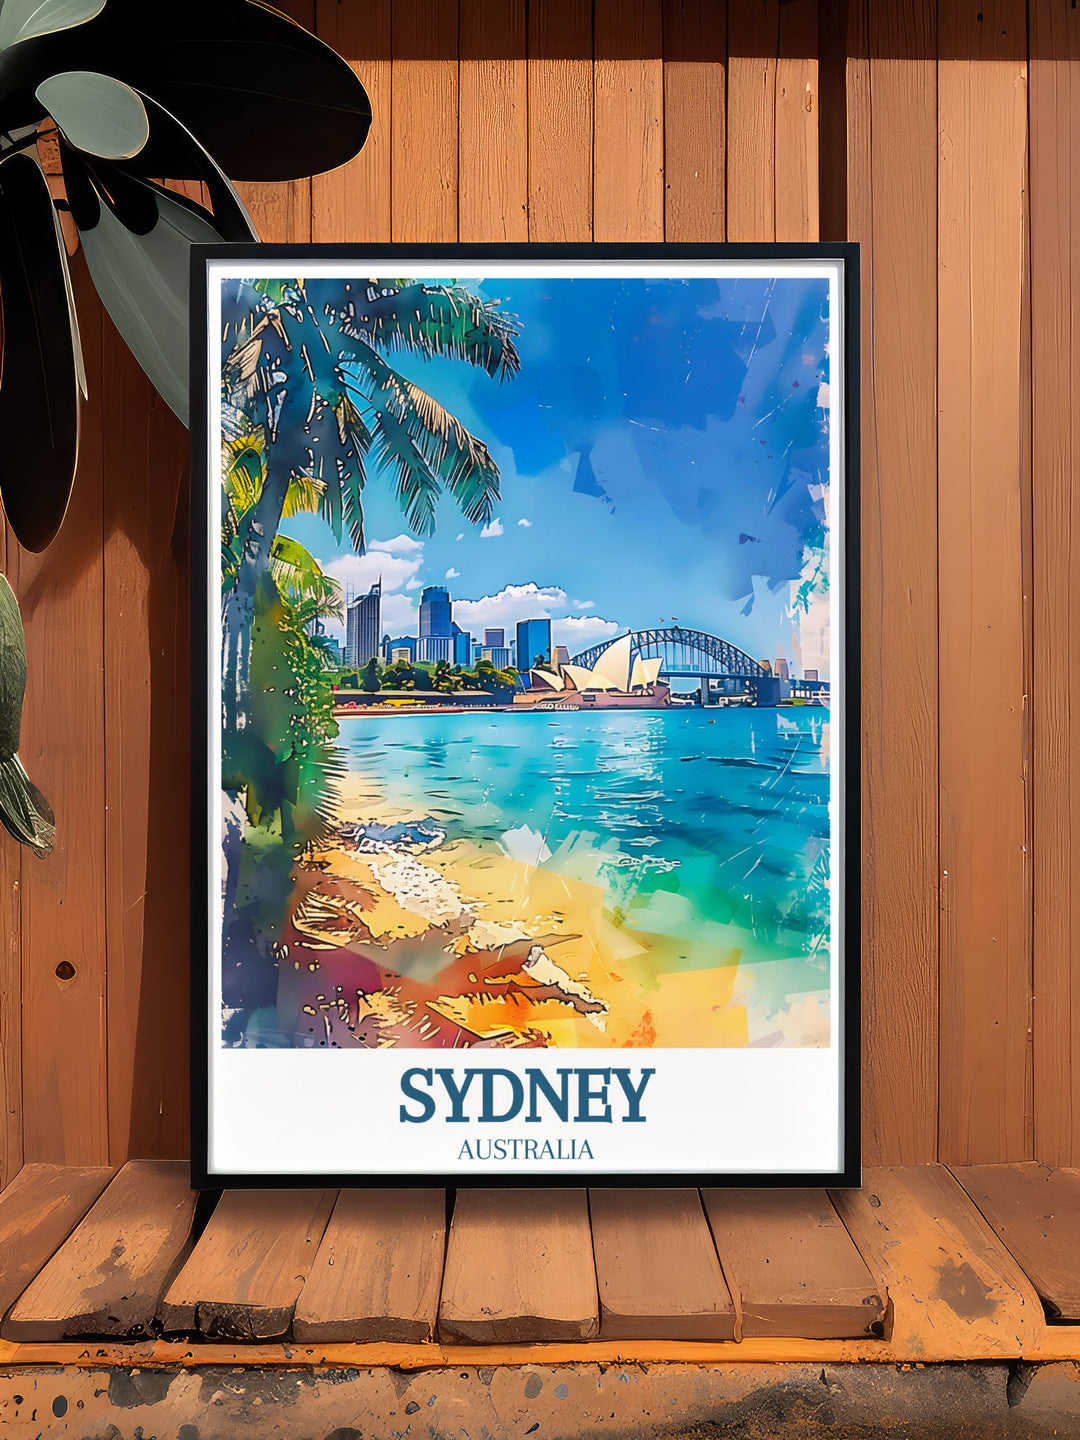 Vibrant Sydney Opera House and Sydney Harbour Bridge poster capturing the essence of Sydneys famous landmarks an ideal addition to your art collection or home decor with its retro travel poster style